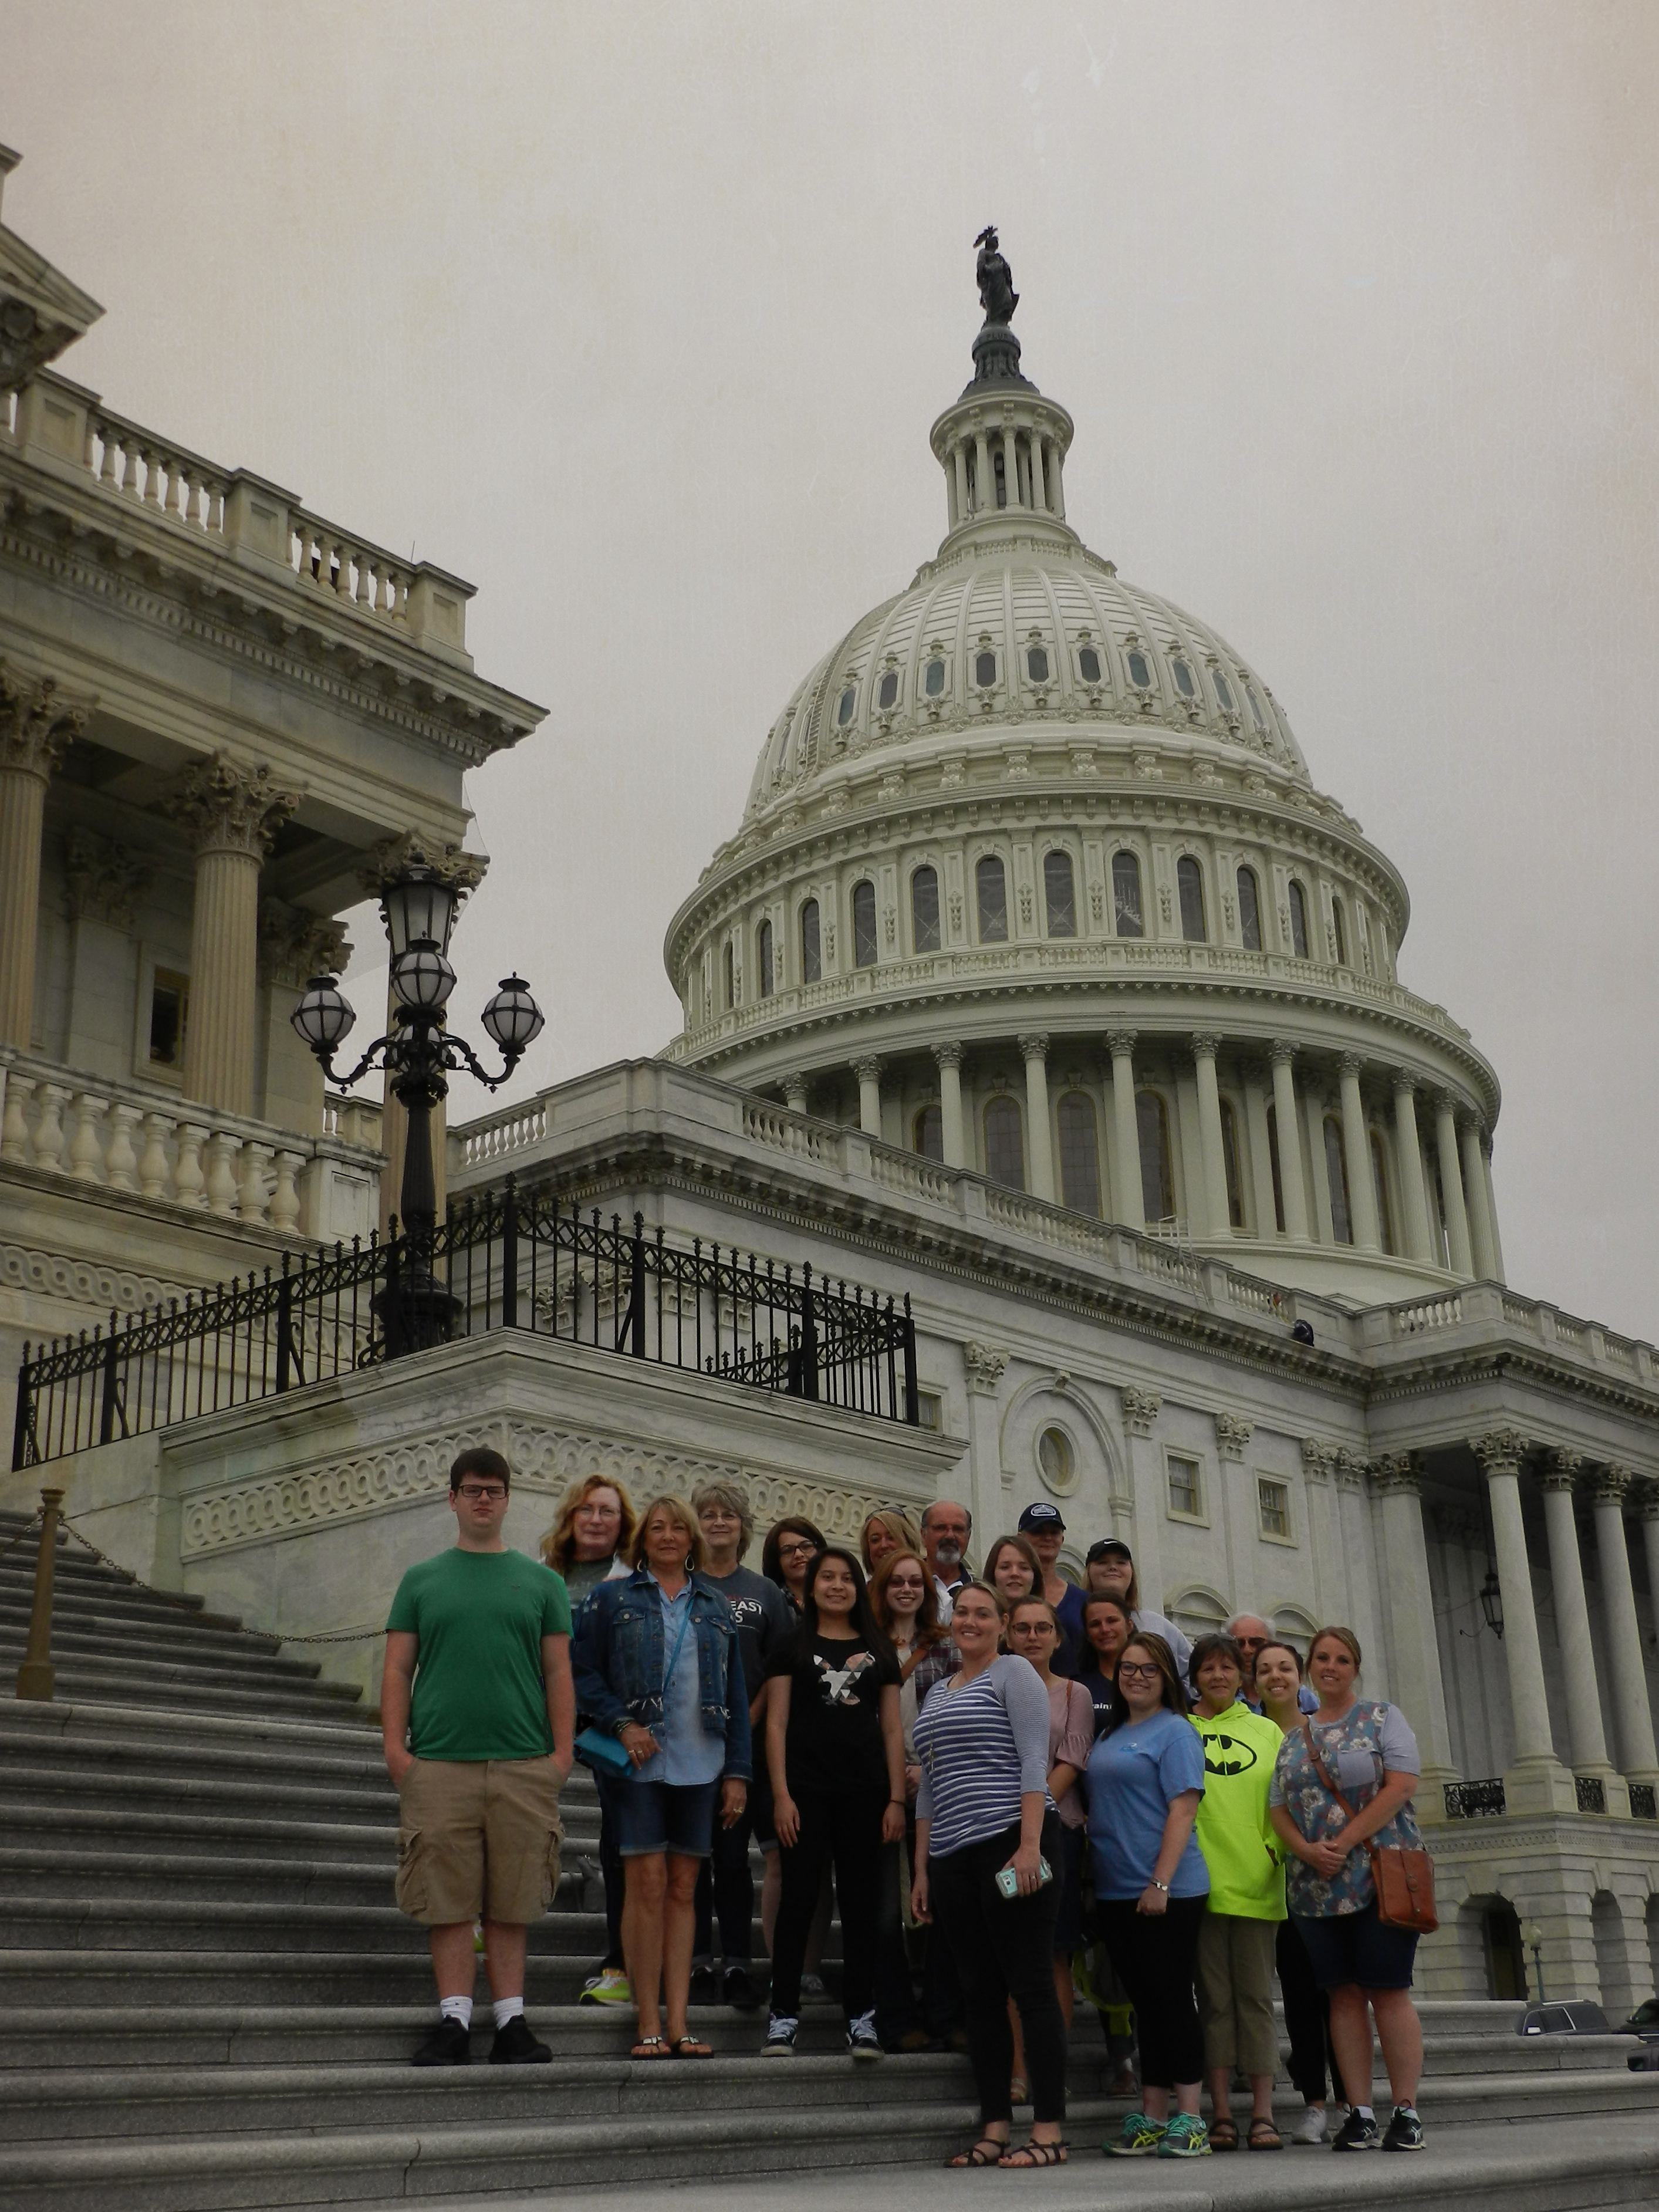 NTCC /uploads/2018/06/group-photo-Capitol-steps-with-me-photoshopped-in1.jpg